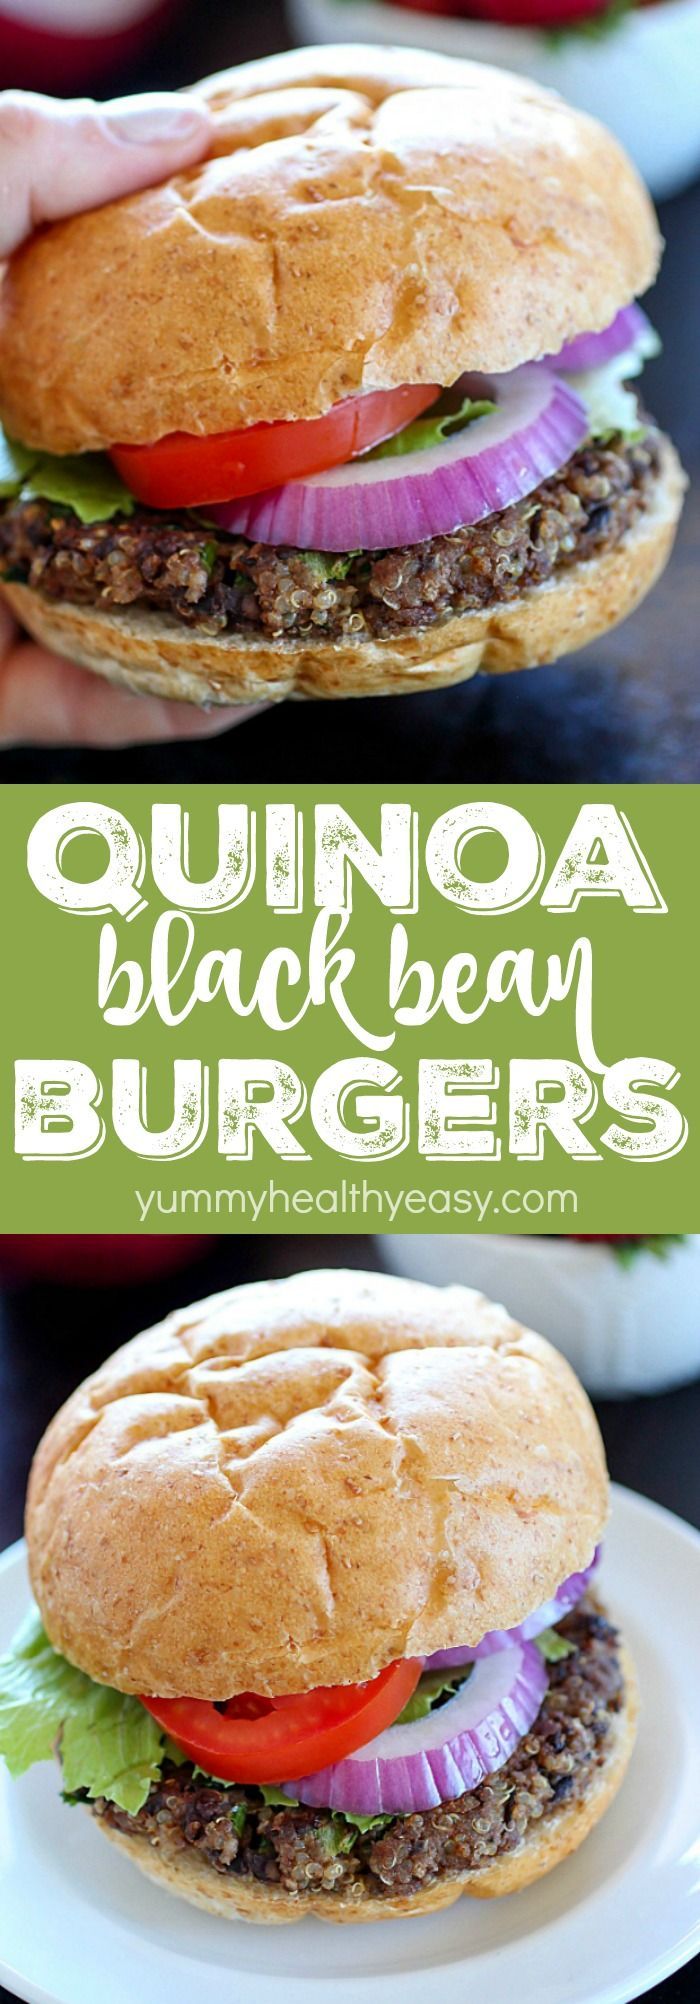 Quinoa Black Bean Burgers - meatless patties full of black beans, quinoa and spices. You won't believe these are vegetarian and won't miss the meat! The flavor is so incredibly delicious and only 270 calories per burger! -   20 quinoa recipes patties
 ideas